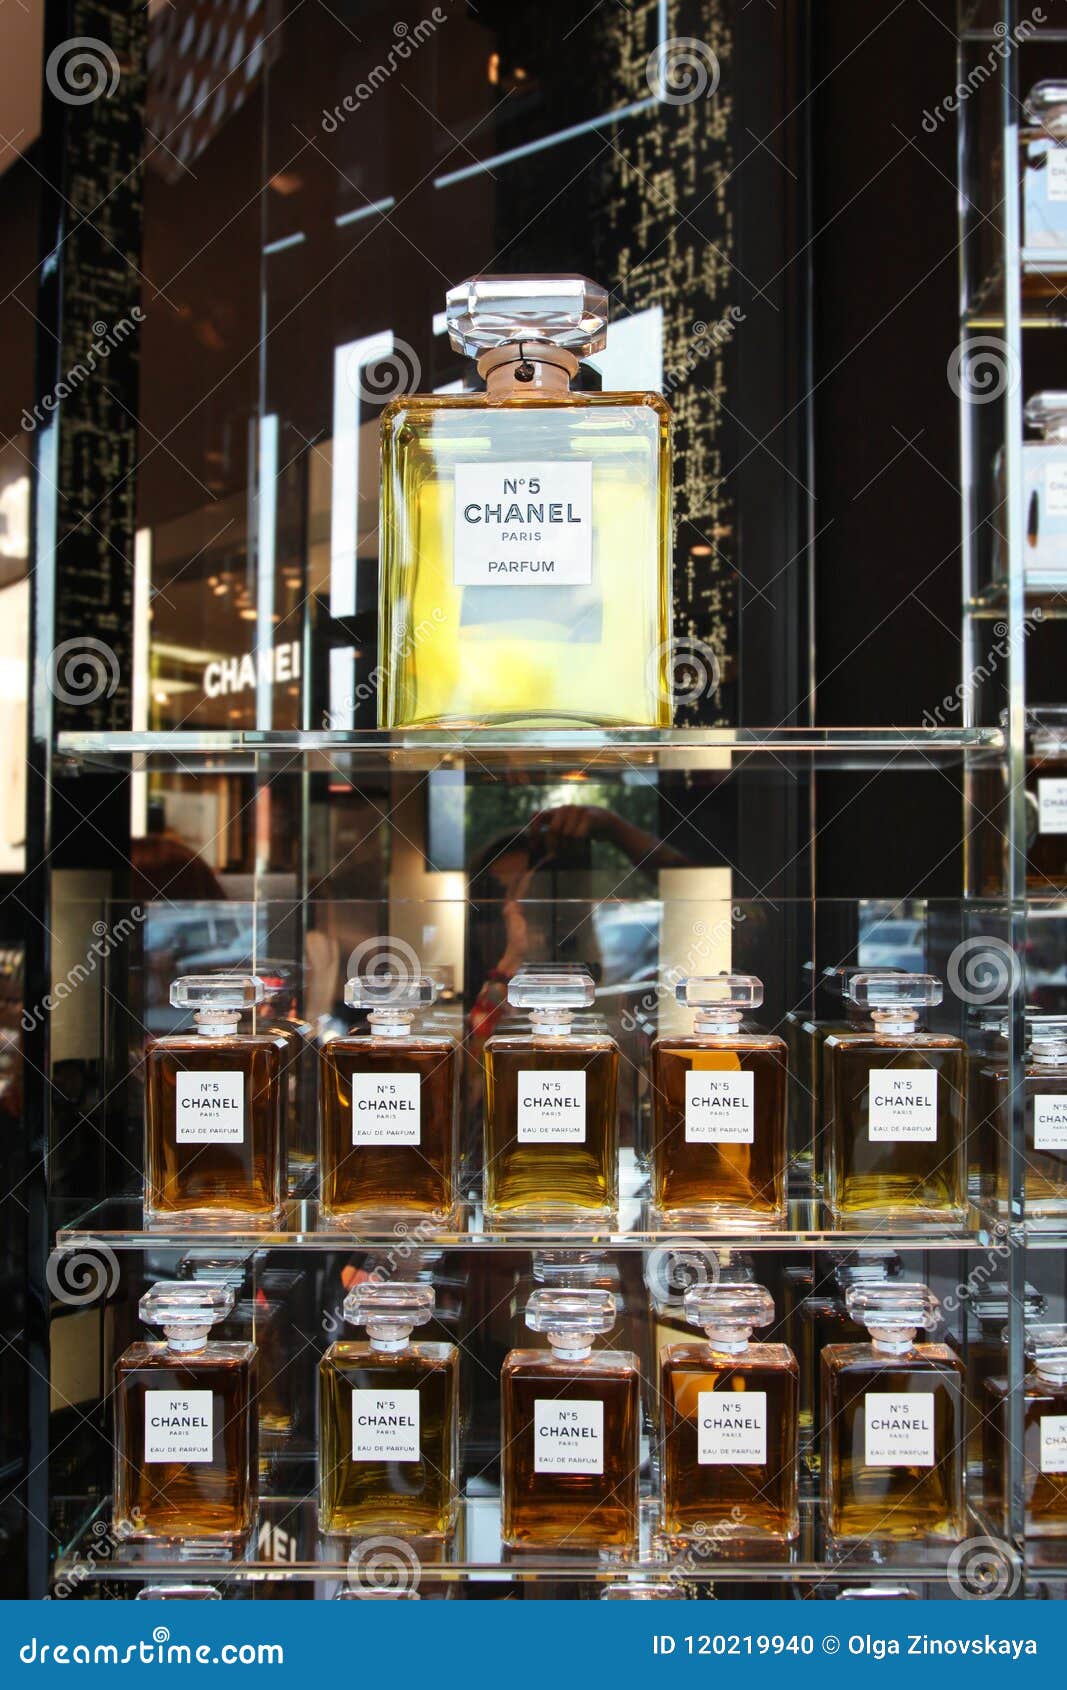 Showcase with Bottles of Perfume CHANEL â„– 5. Moscow. 24.07.2013